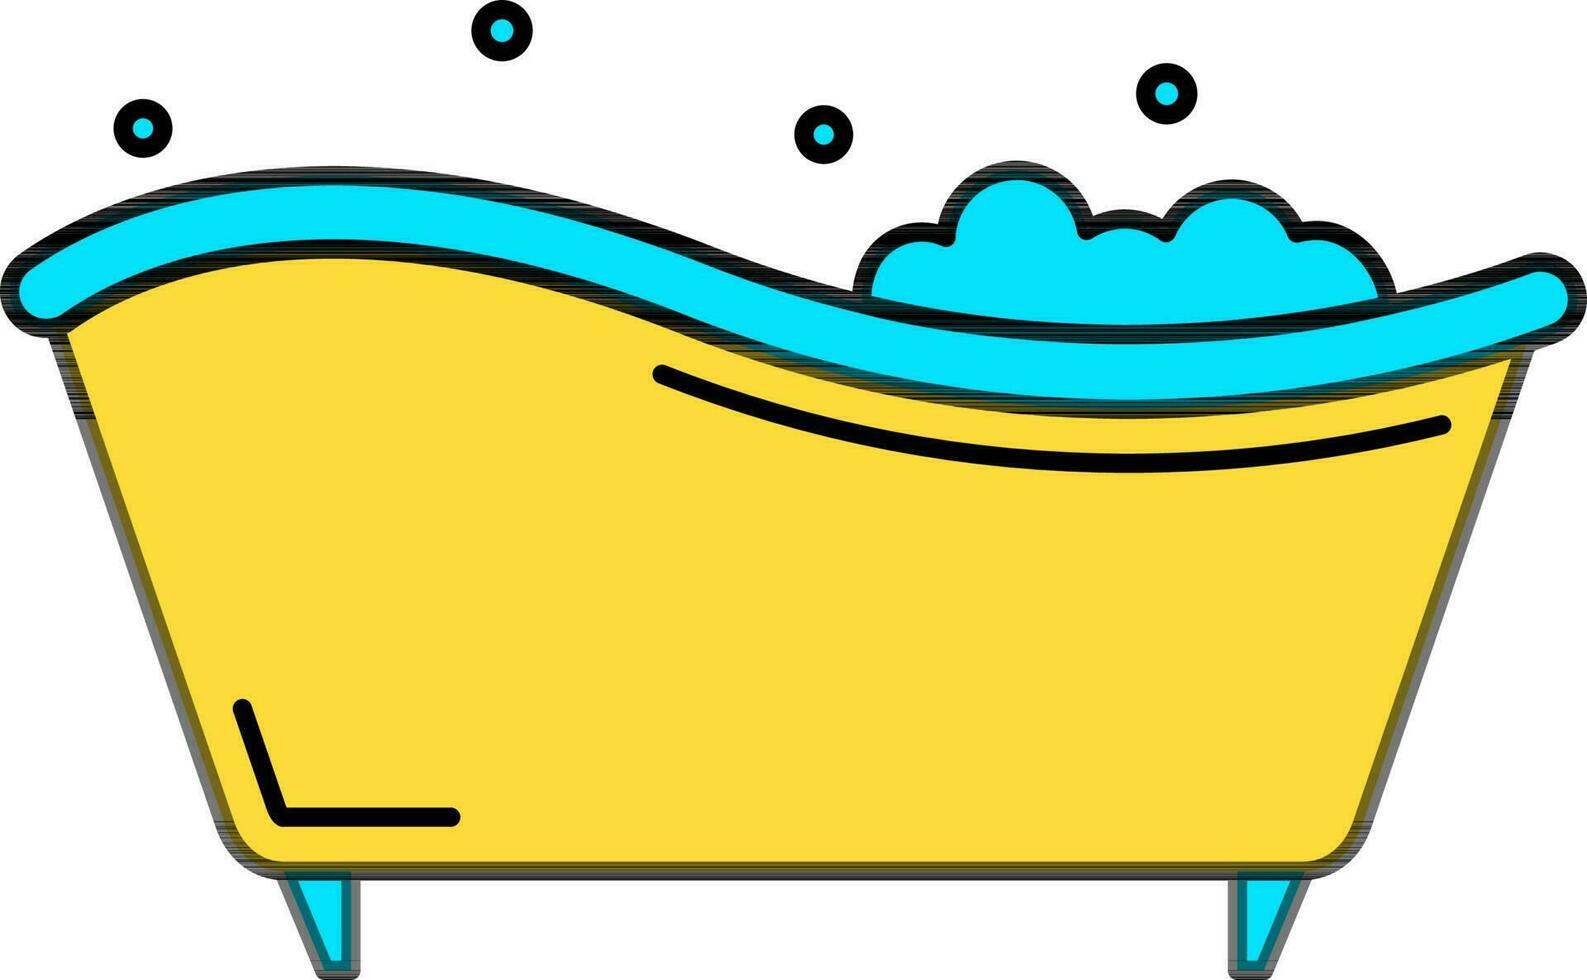 Bathtub Icon Or Symbol In Blue And Yellow Color. vector